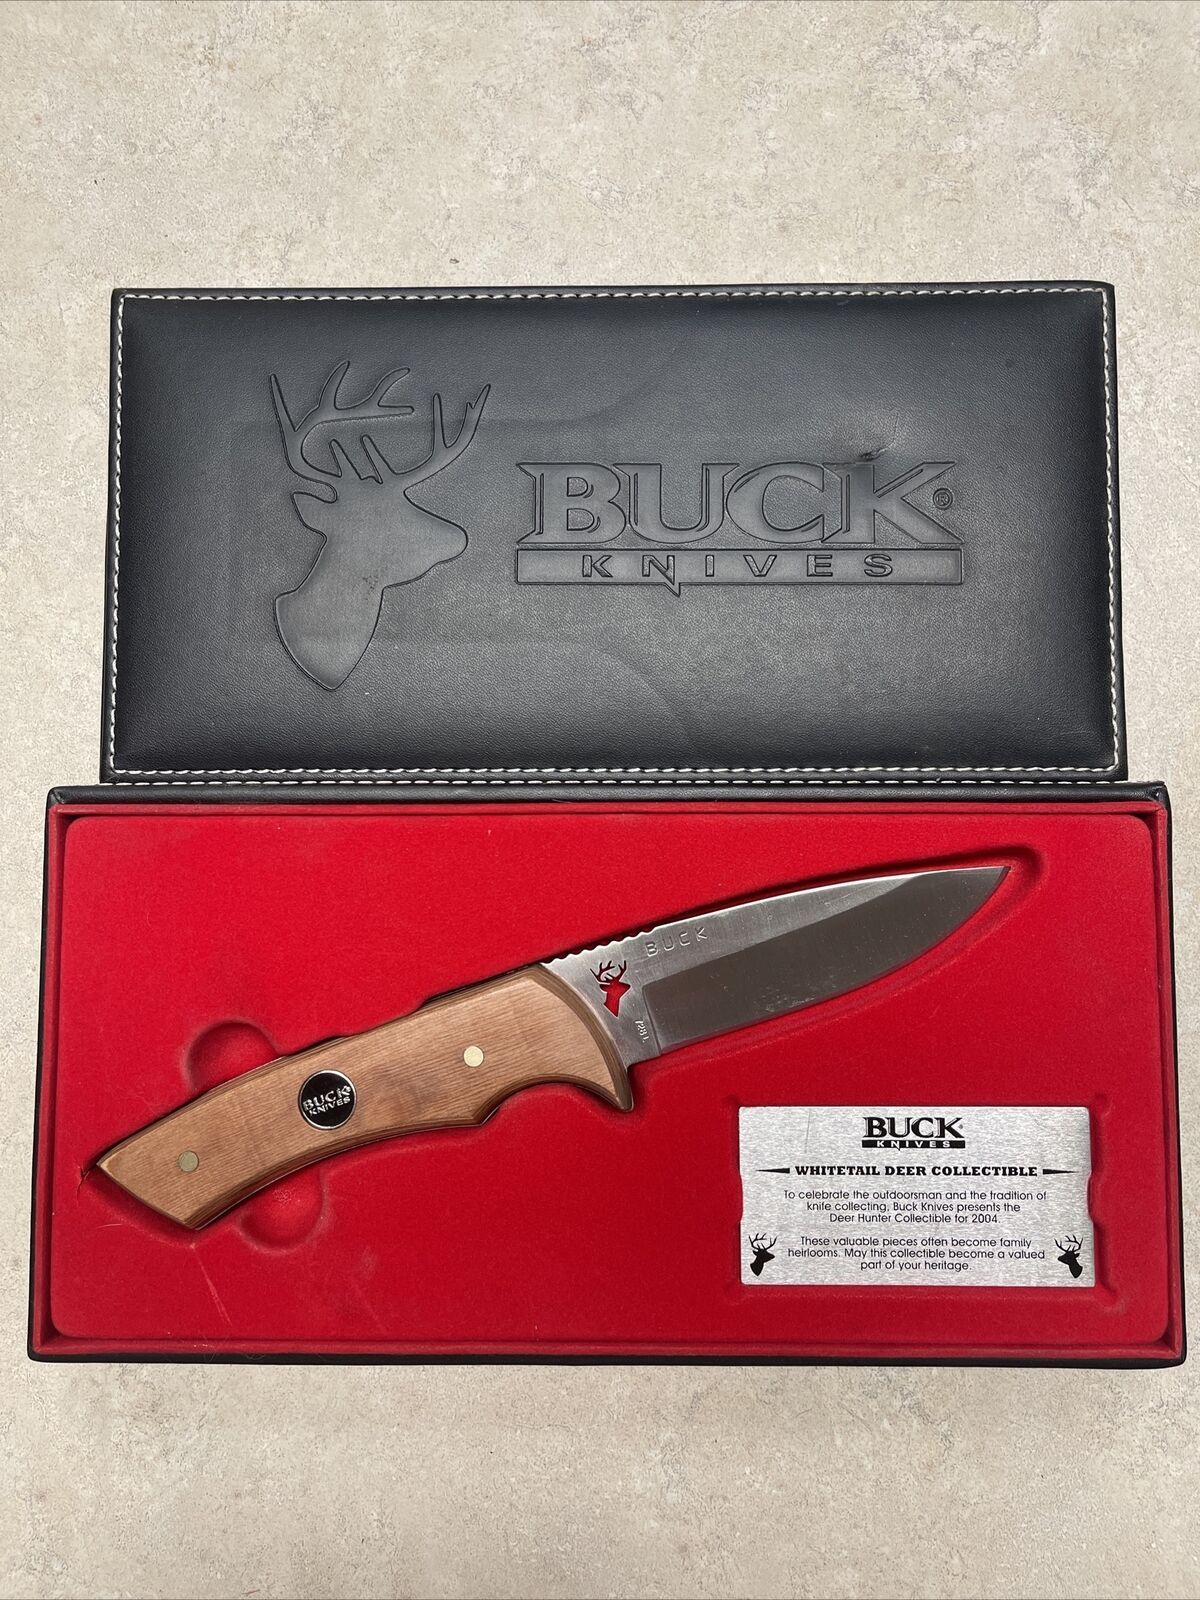 2004 BUCK KNIVE 728 WHITETAIL DEER COLLECTIBLE KNIFE & PRESENTATION BOX